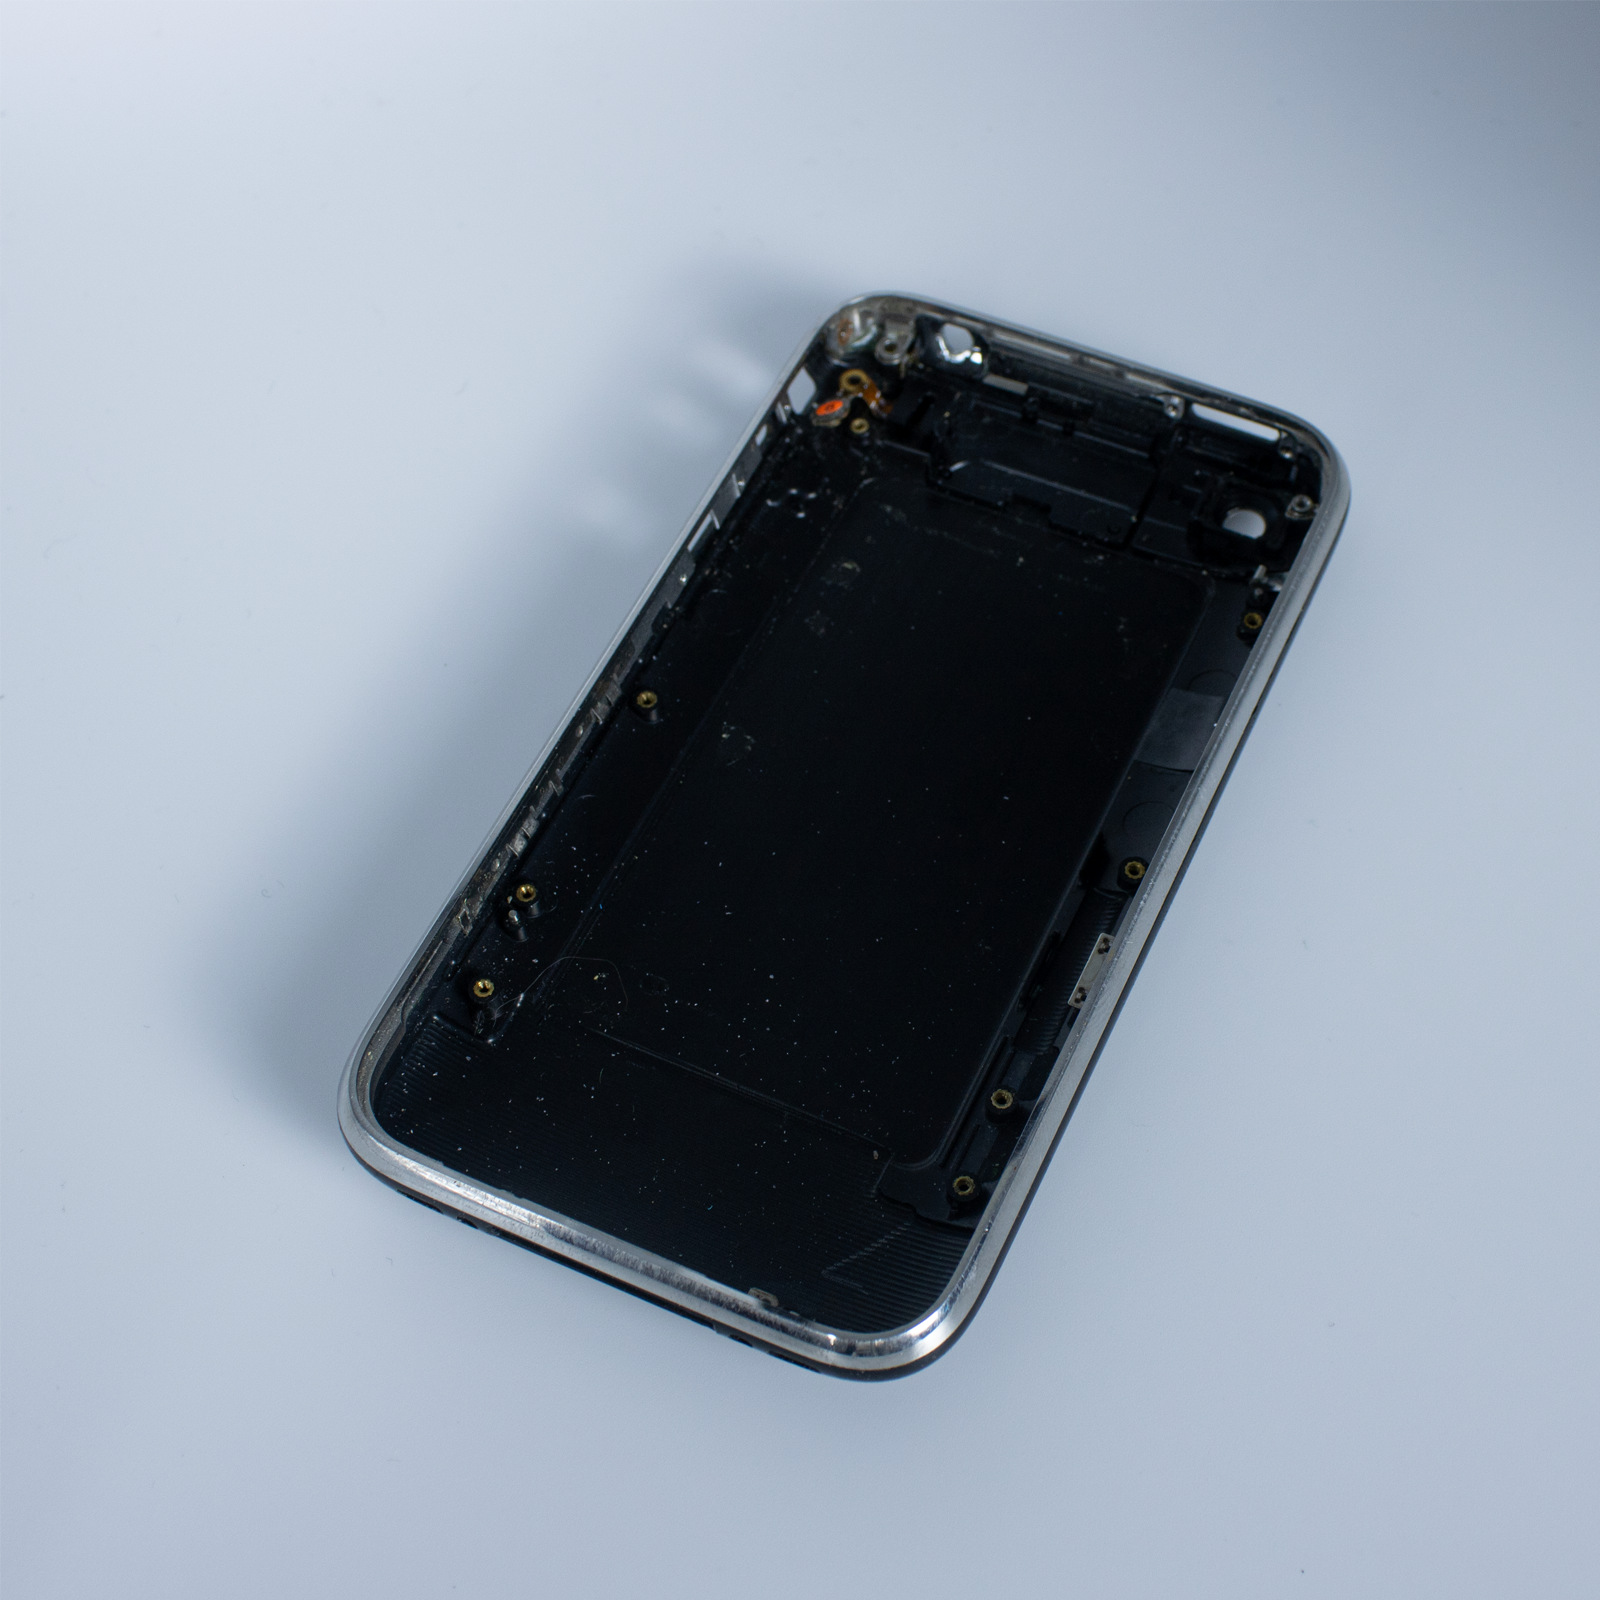 iPhone 3GS - Back Housing